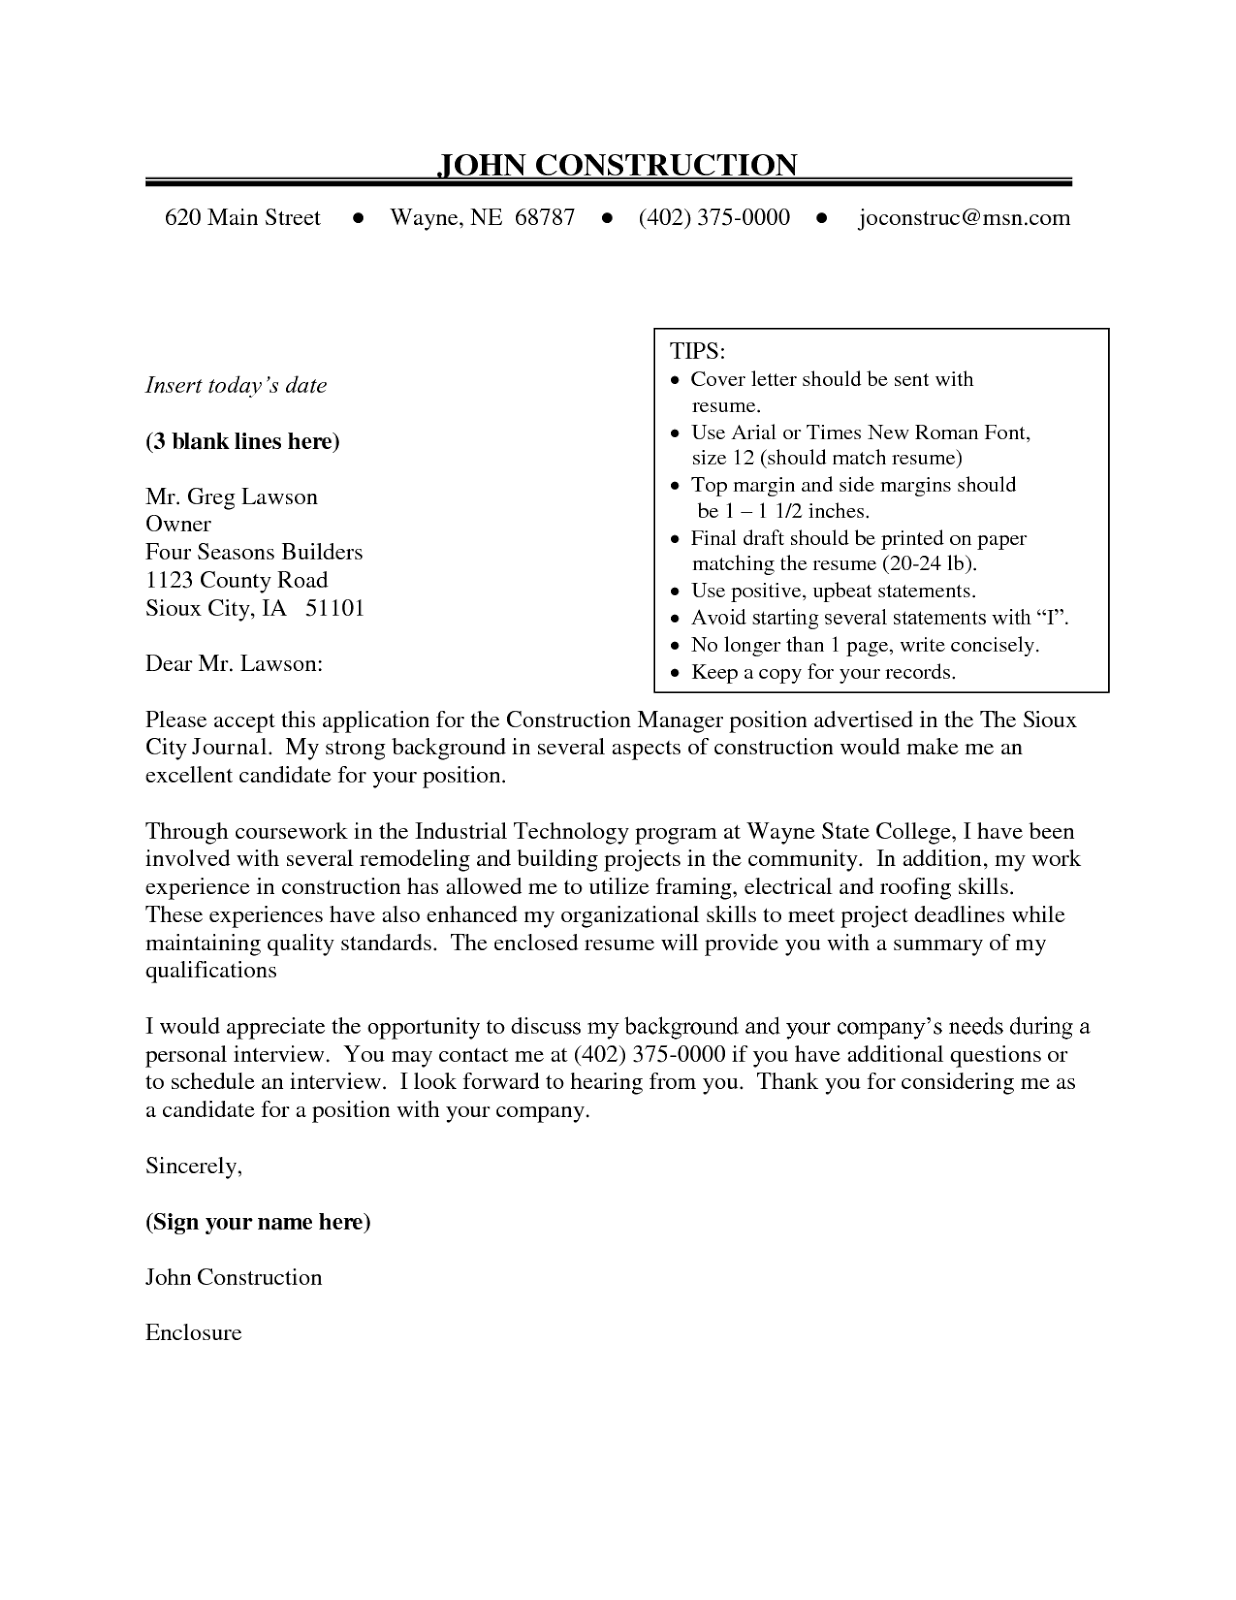 Military spouse cover letter examples